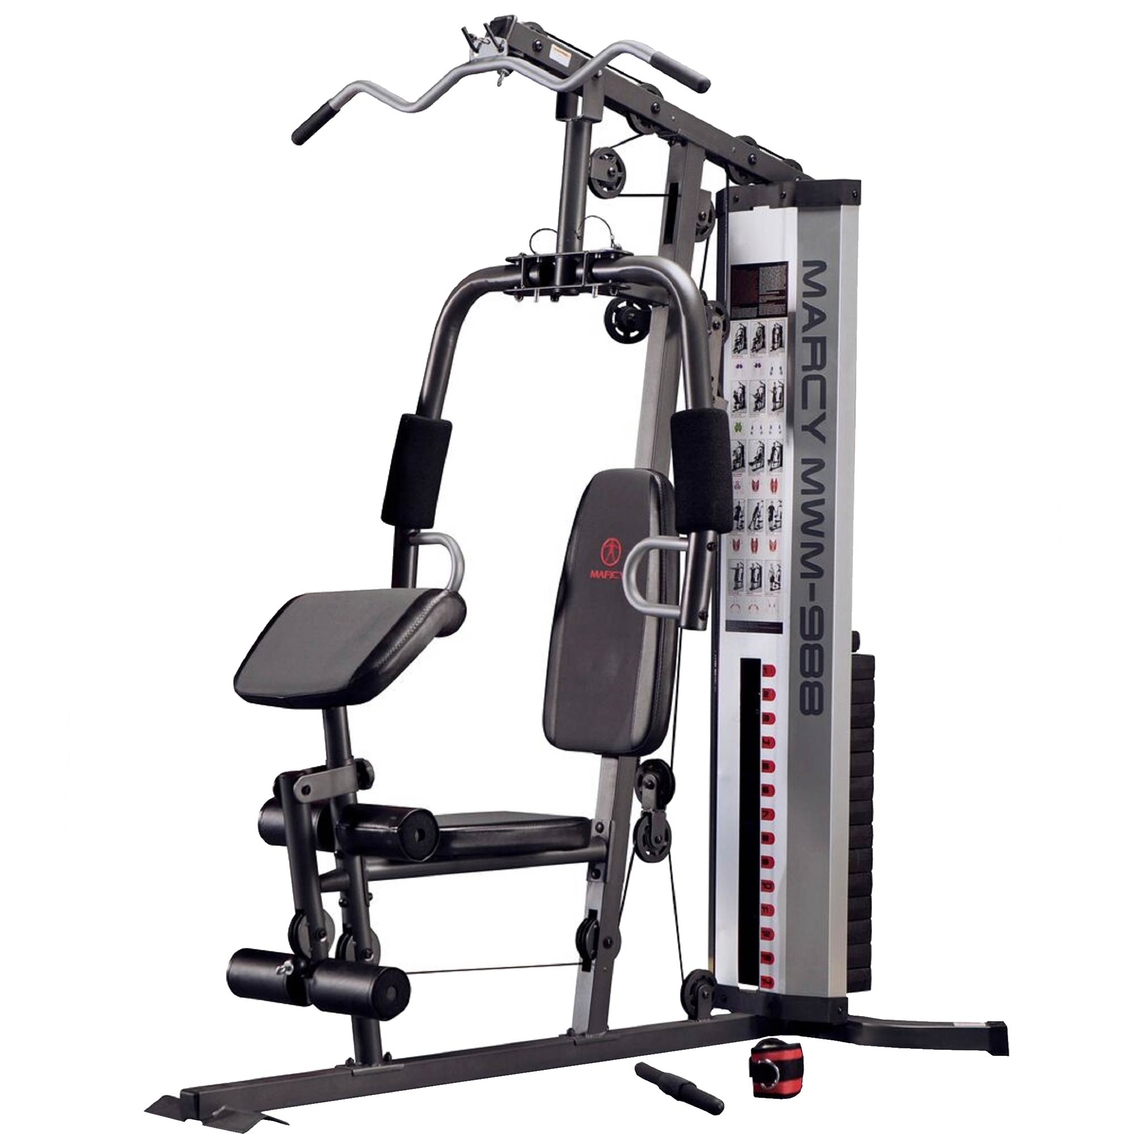 Marcy Home Gym with 150 lb. Weights and Shroud - Image 1 of 4